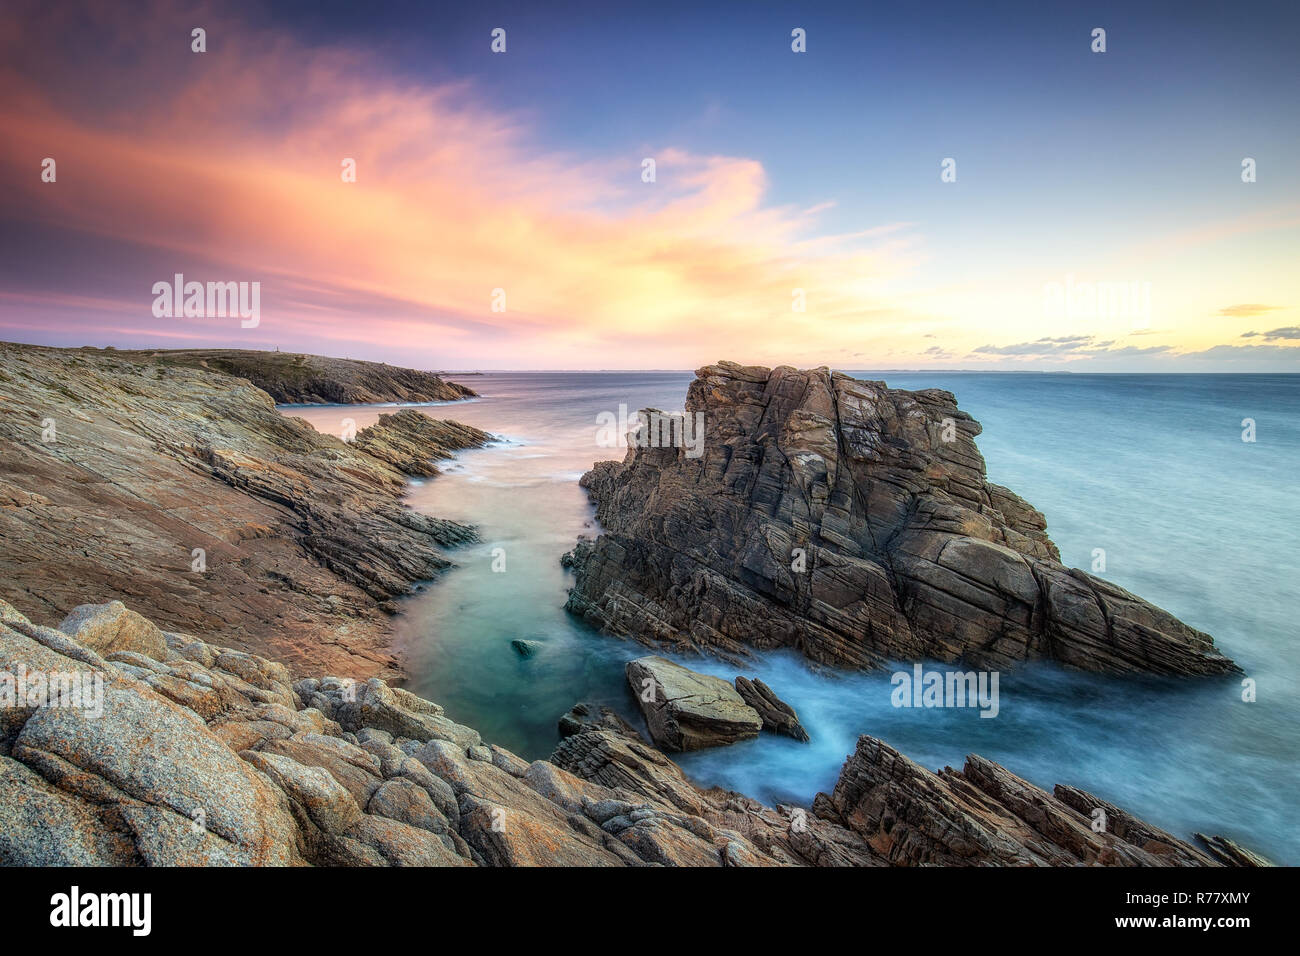 Rocky coastline at the côte sauvage in Brittany, France Stock Photo